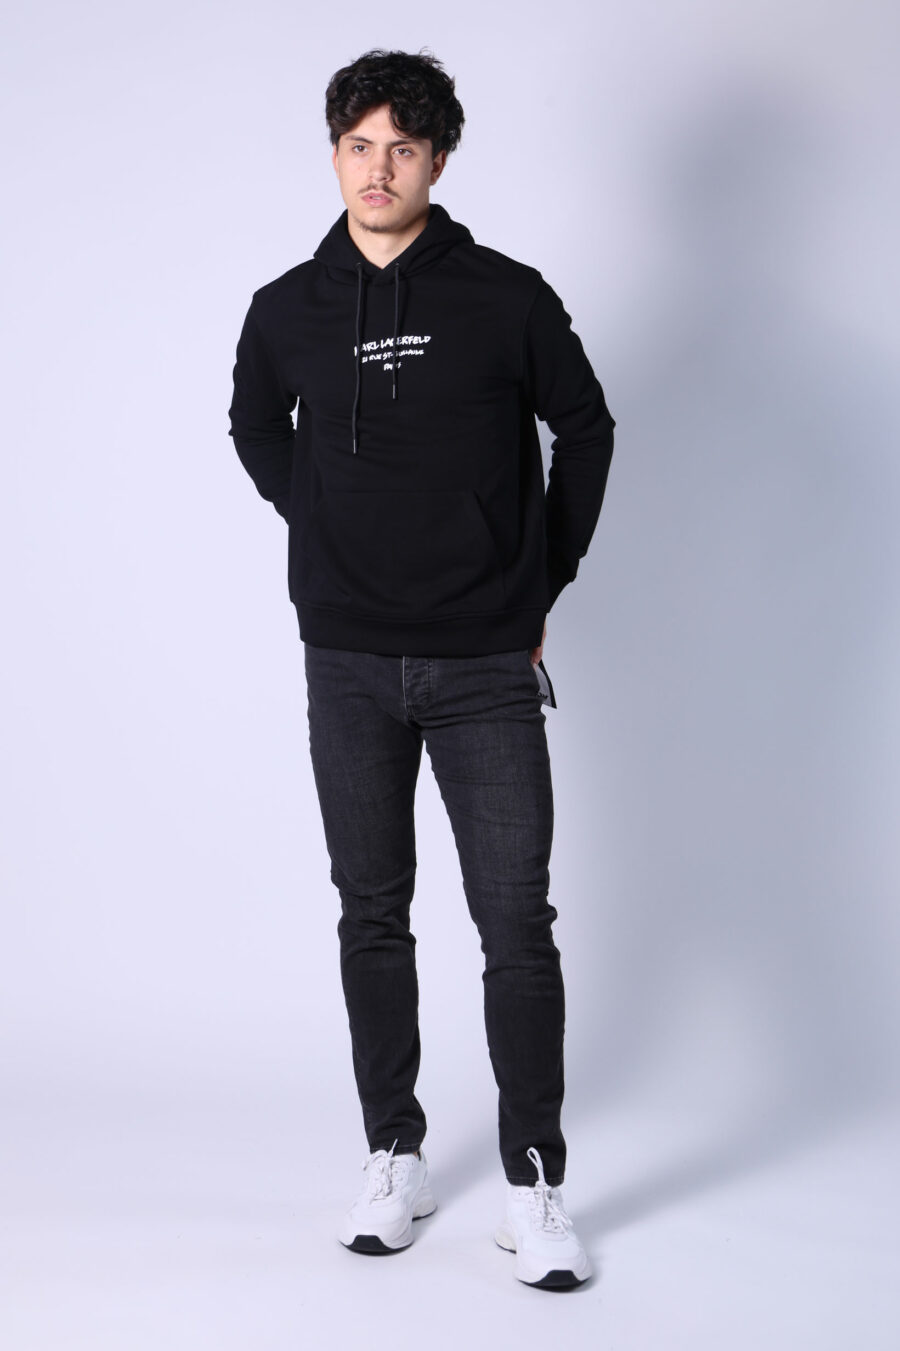 Black hooded sweatshirt with logo "rue st guillaume" - Untitled Catalog 05747